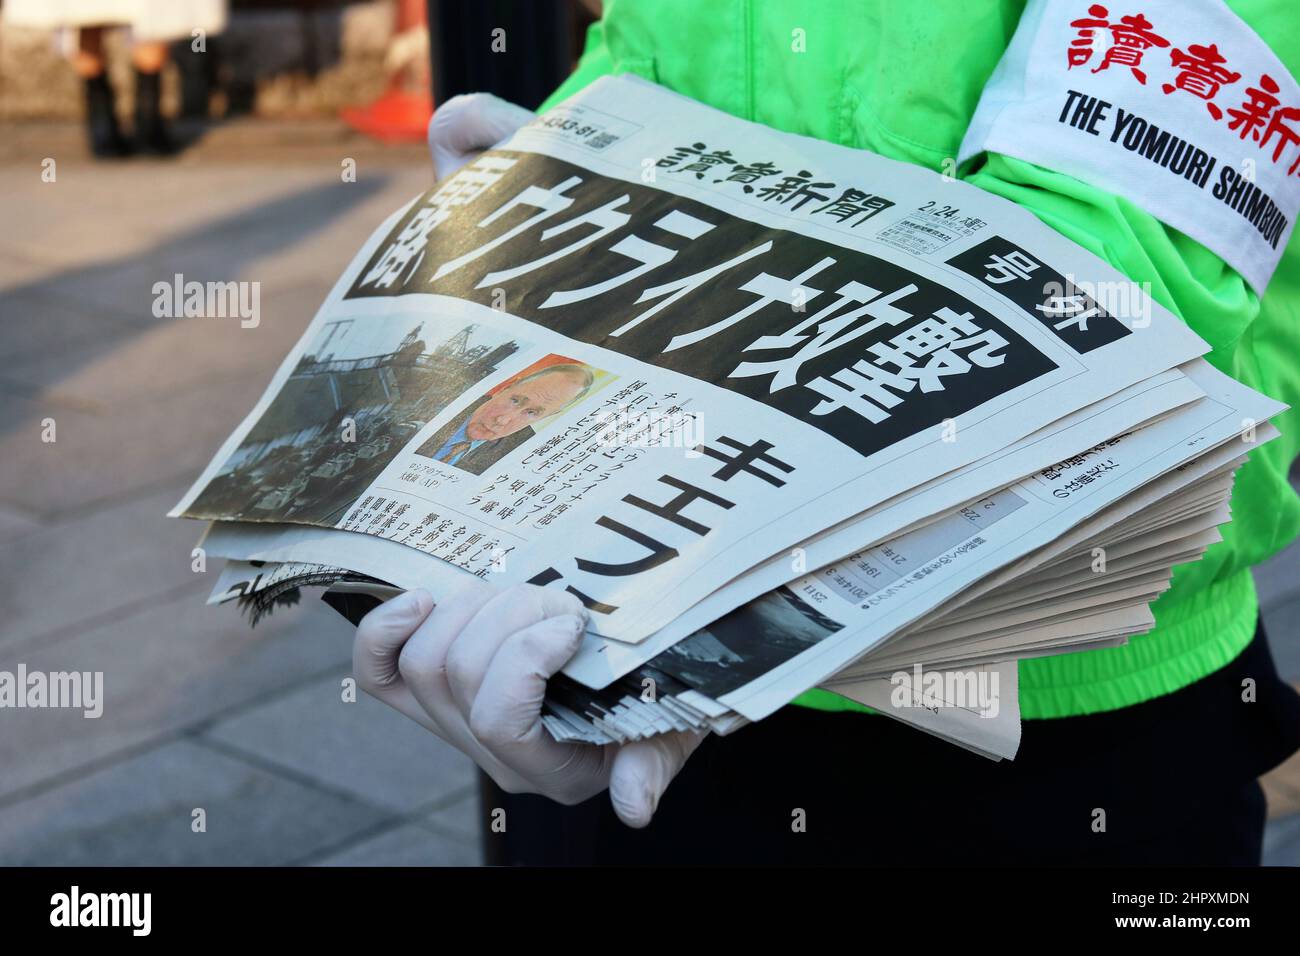 Special edition Yomiuri Shimbun newspaper covering Russia's invasion of Ukraine being distributed in Tokyo's Ginza area. Stock Photo